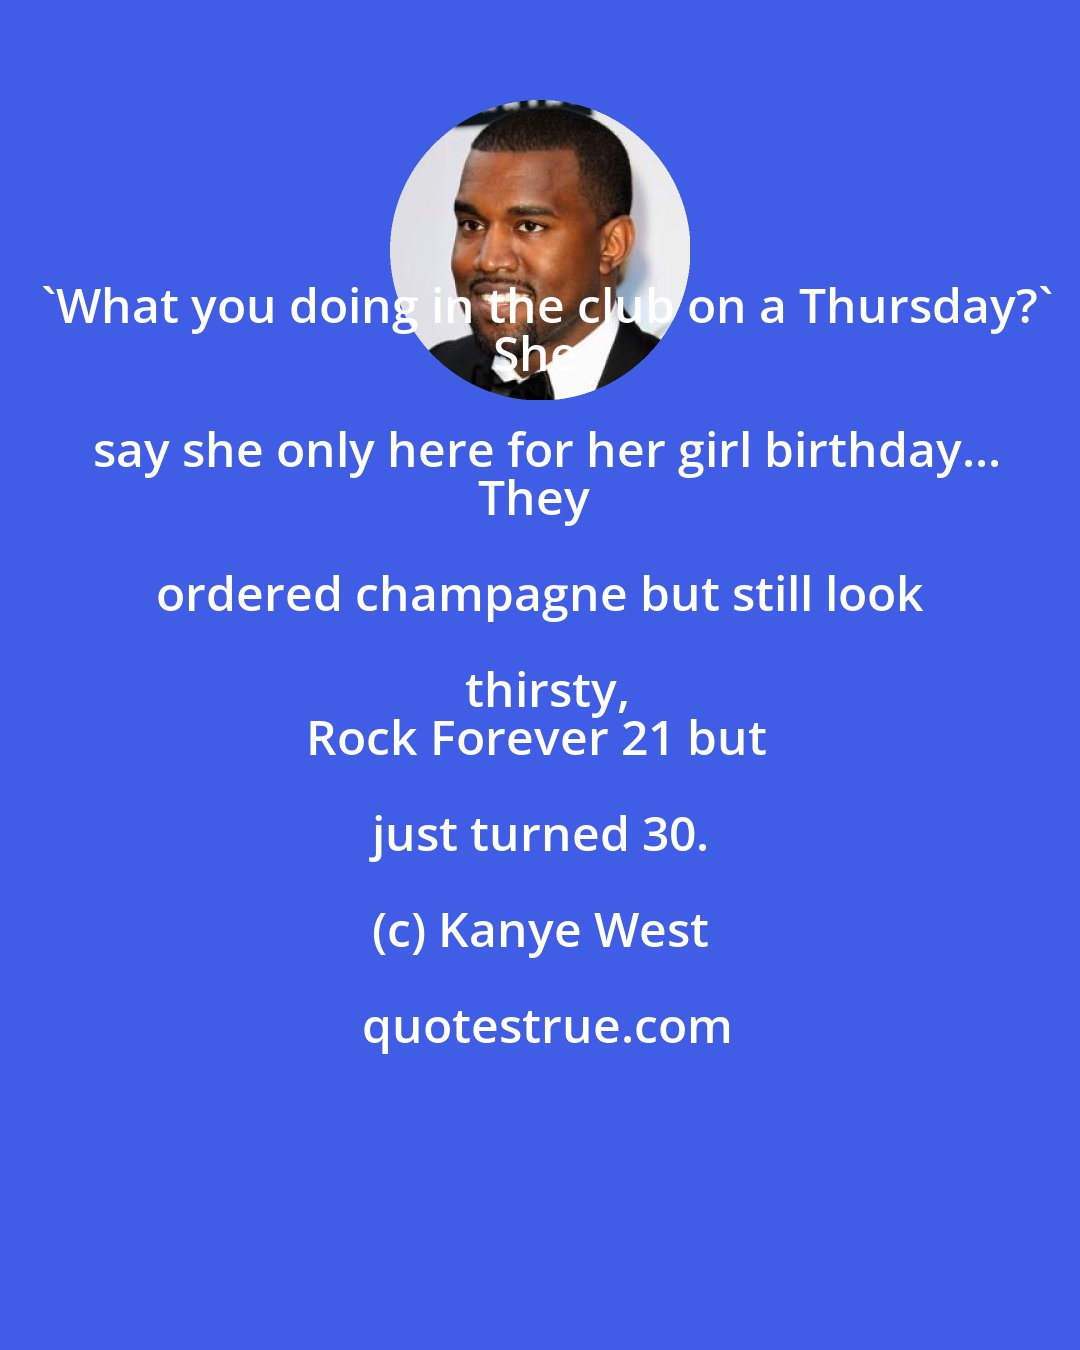 Kanye West: 'What you doing in the club on a Thursday?'
She say she only here for her girl birthday...
They ordered champagne but still look thirsty,
Rock Forever 21 but just turned 30.